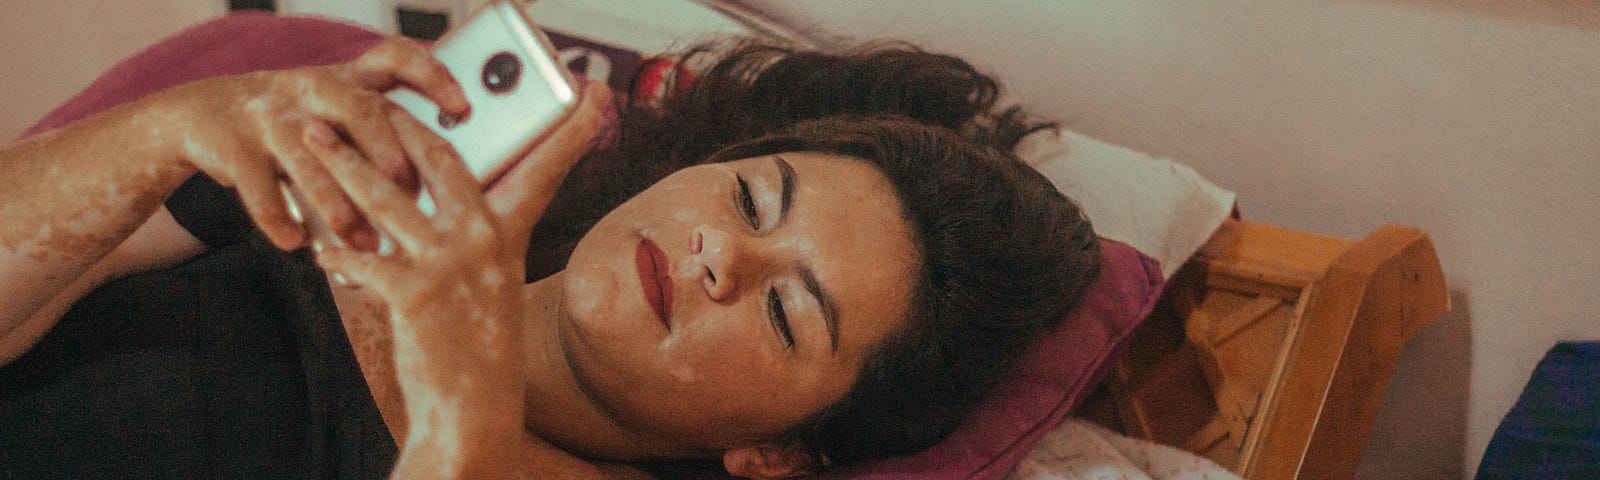 A photo of a young woman lying in bed, texting on her phone.